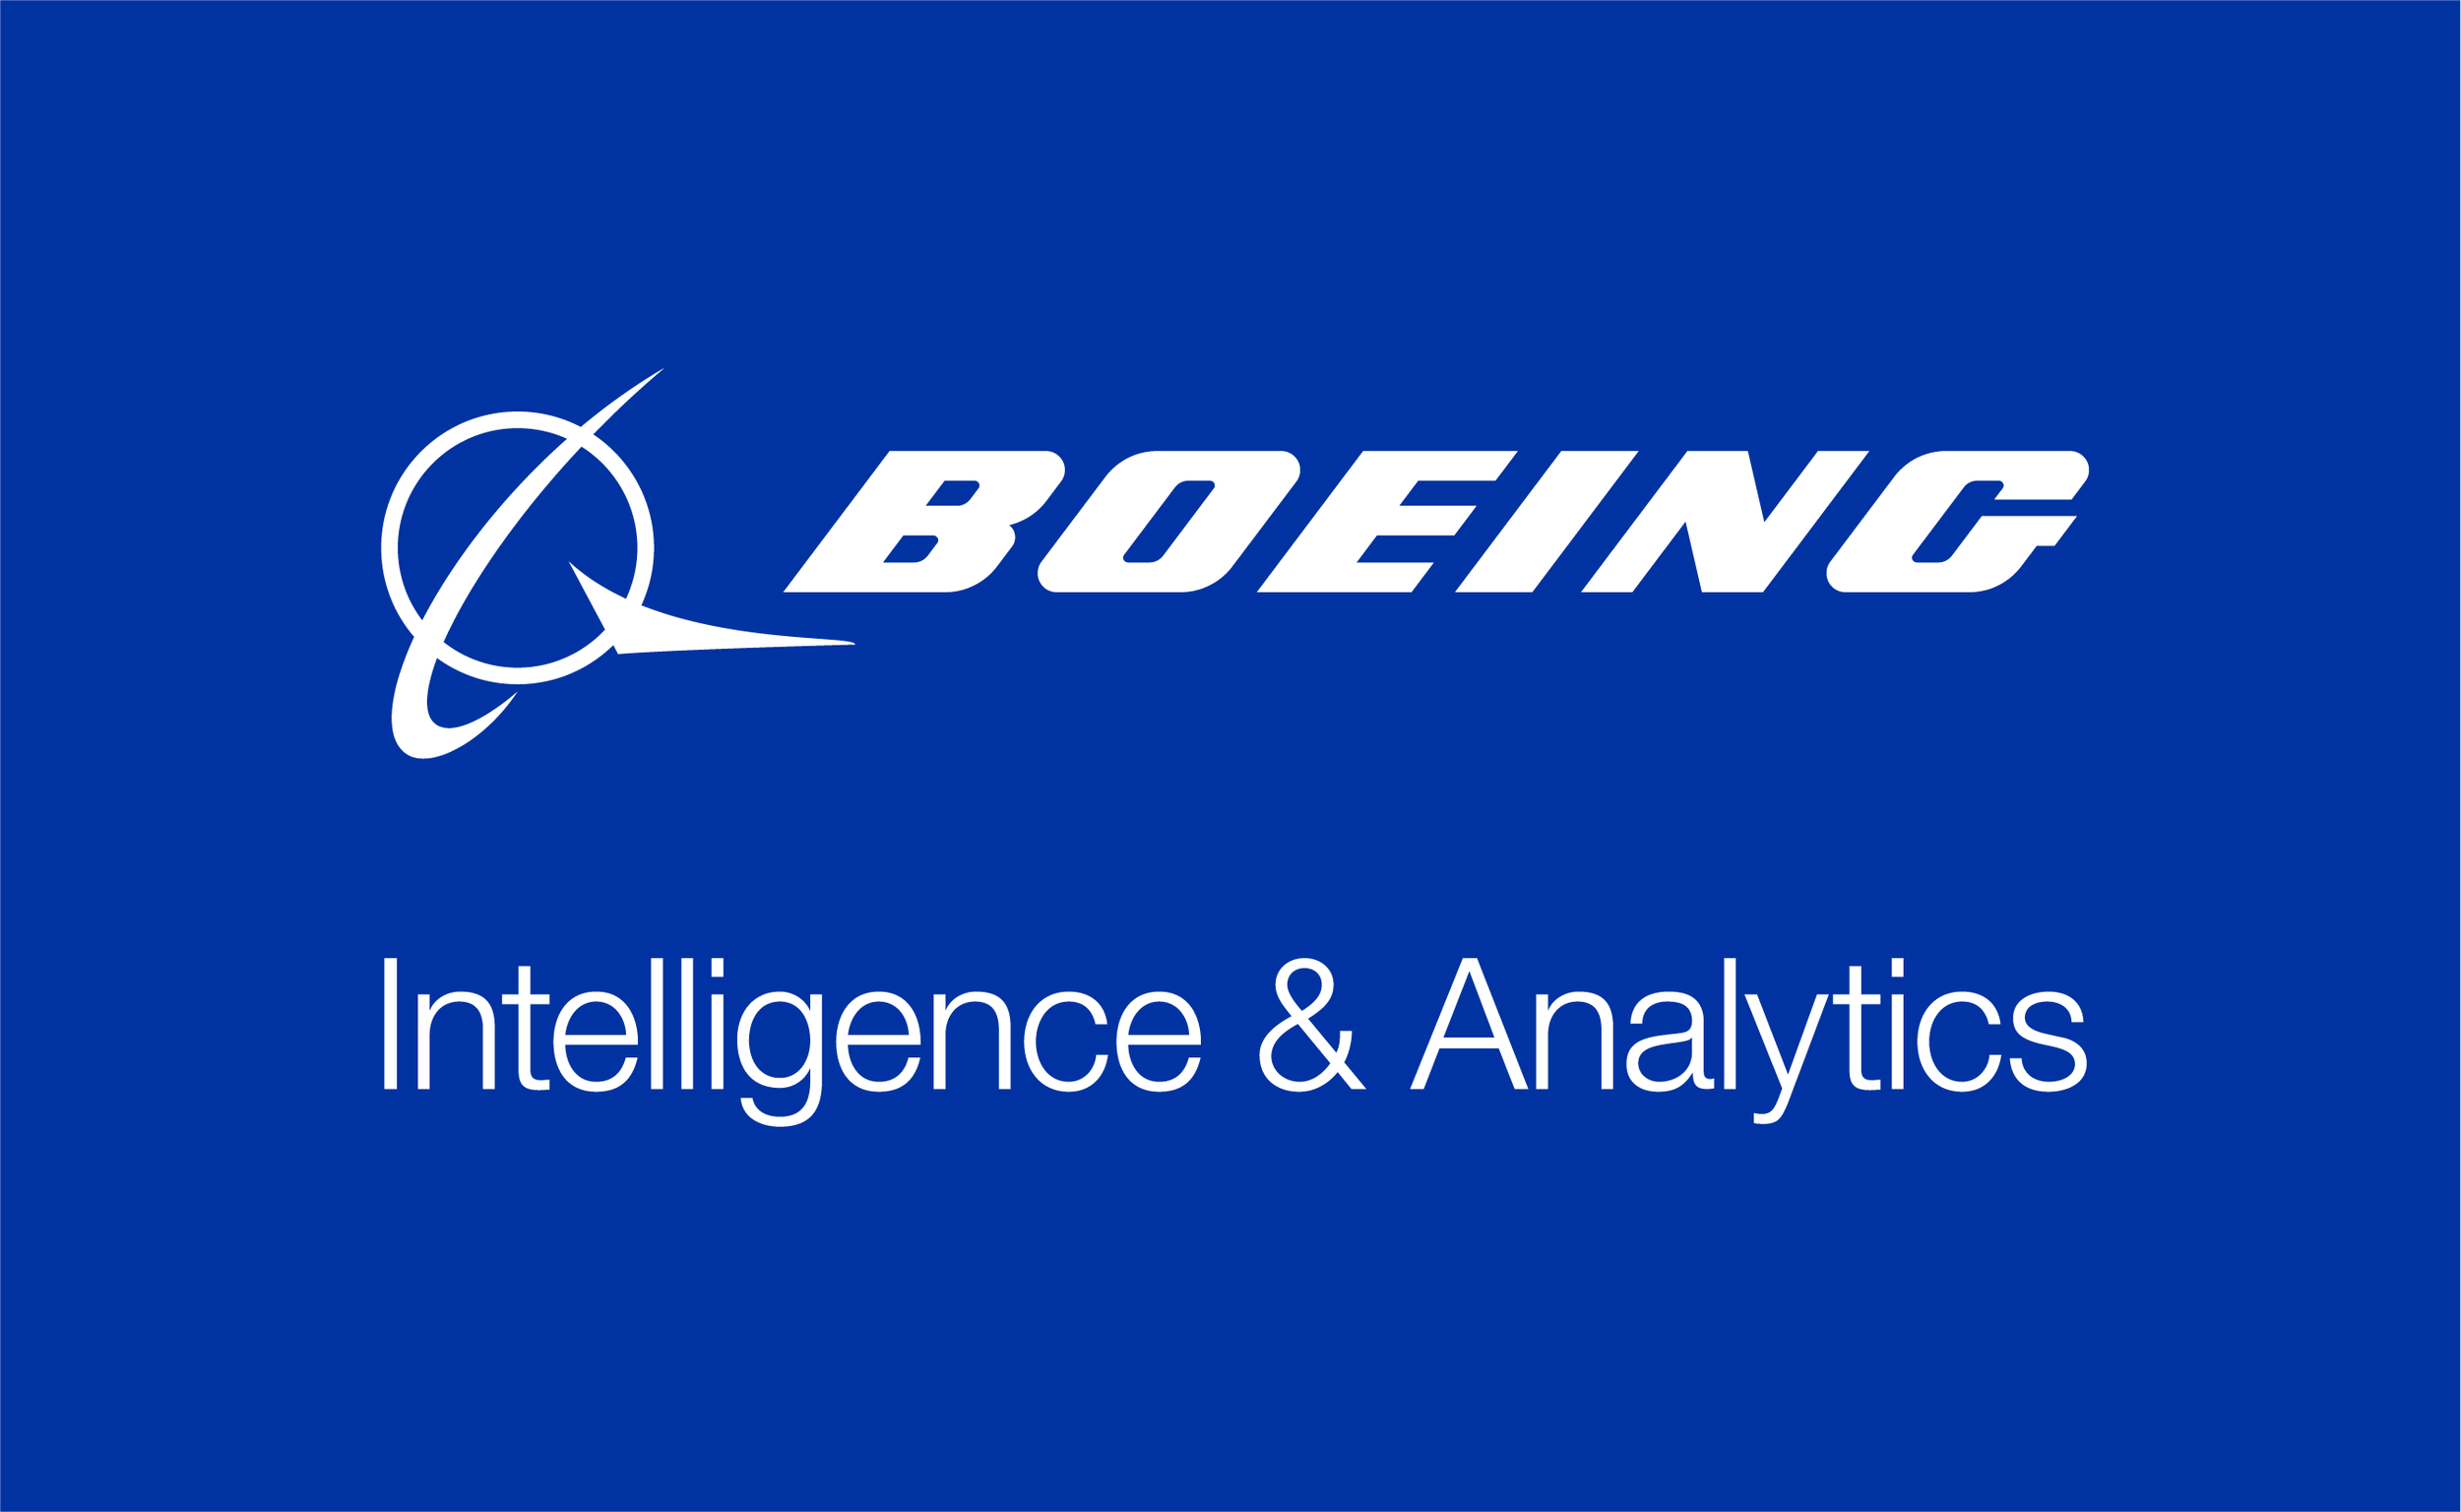 the boeing company mission statement